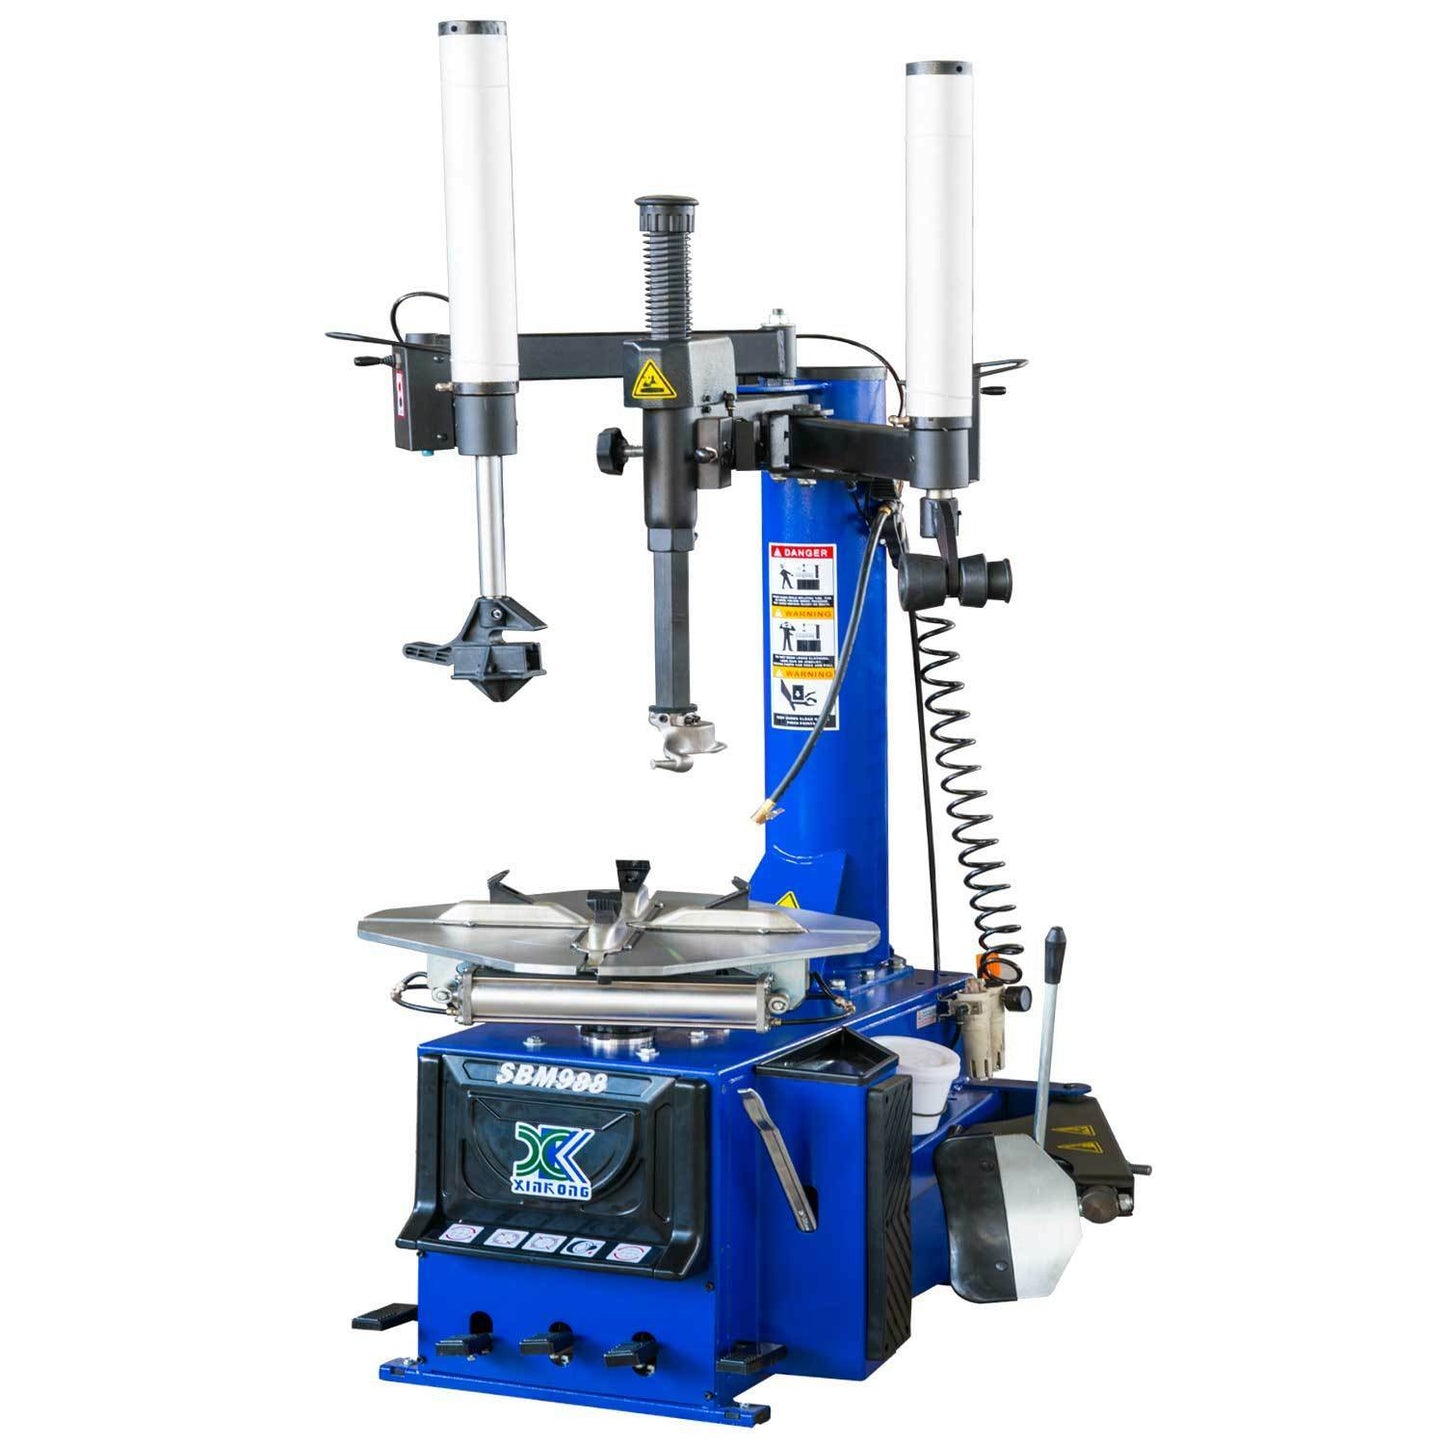 Lankistr 988 Tire Changer Wheel Changer Machine 110v With Auxiliary Arm 12″-24″